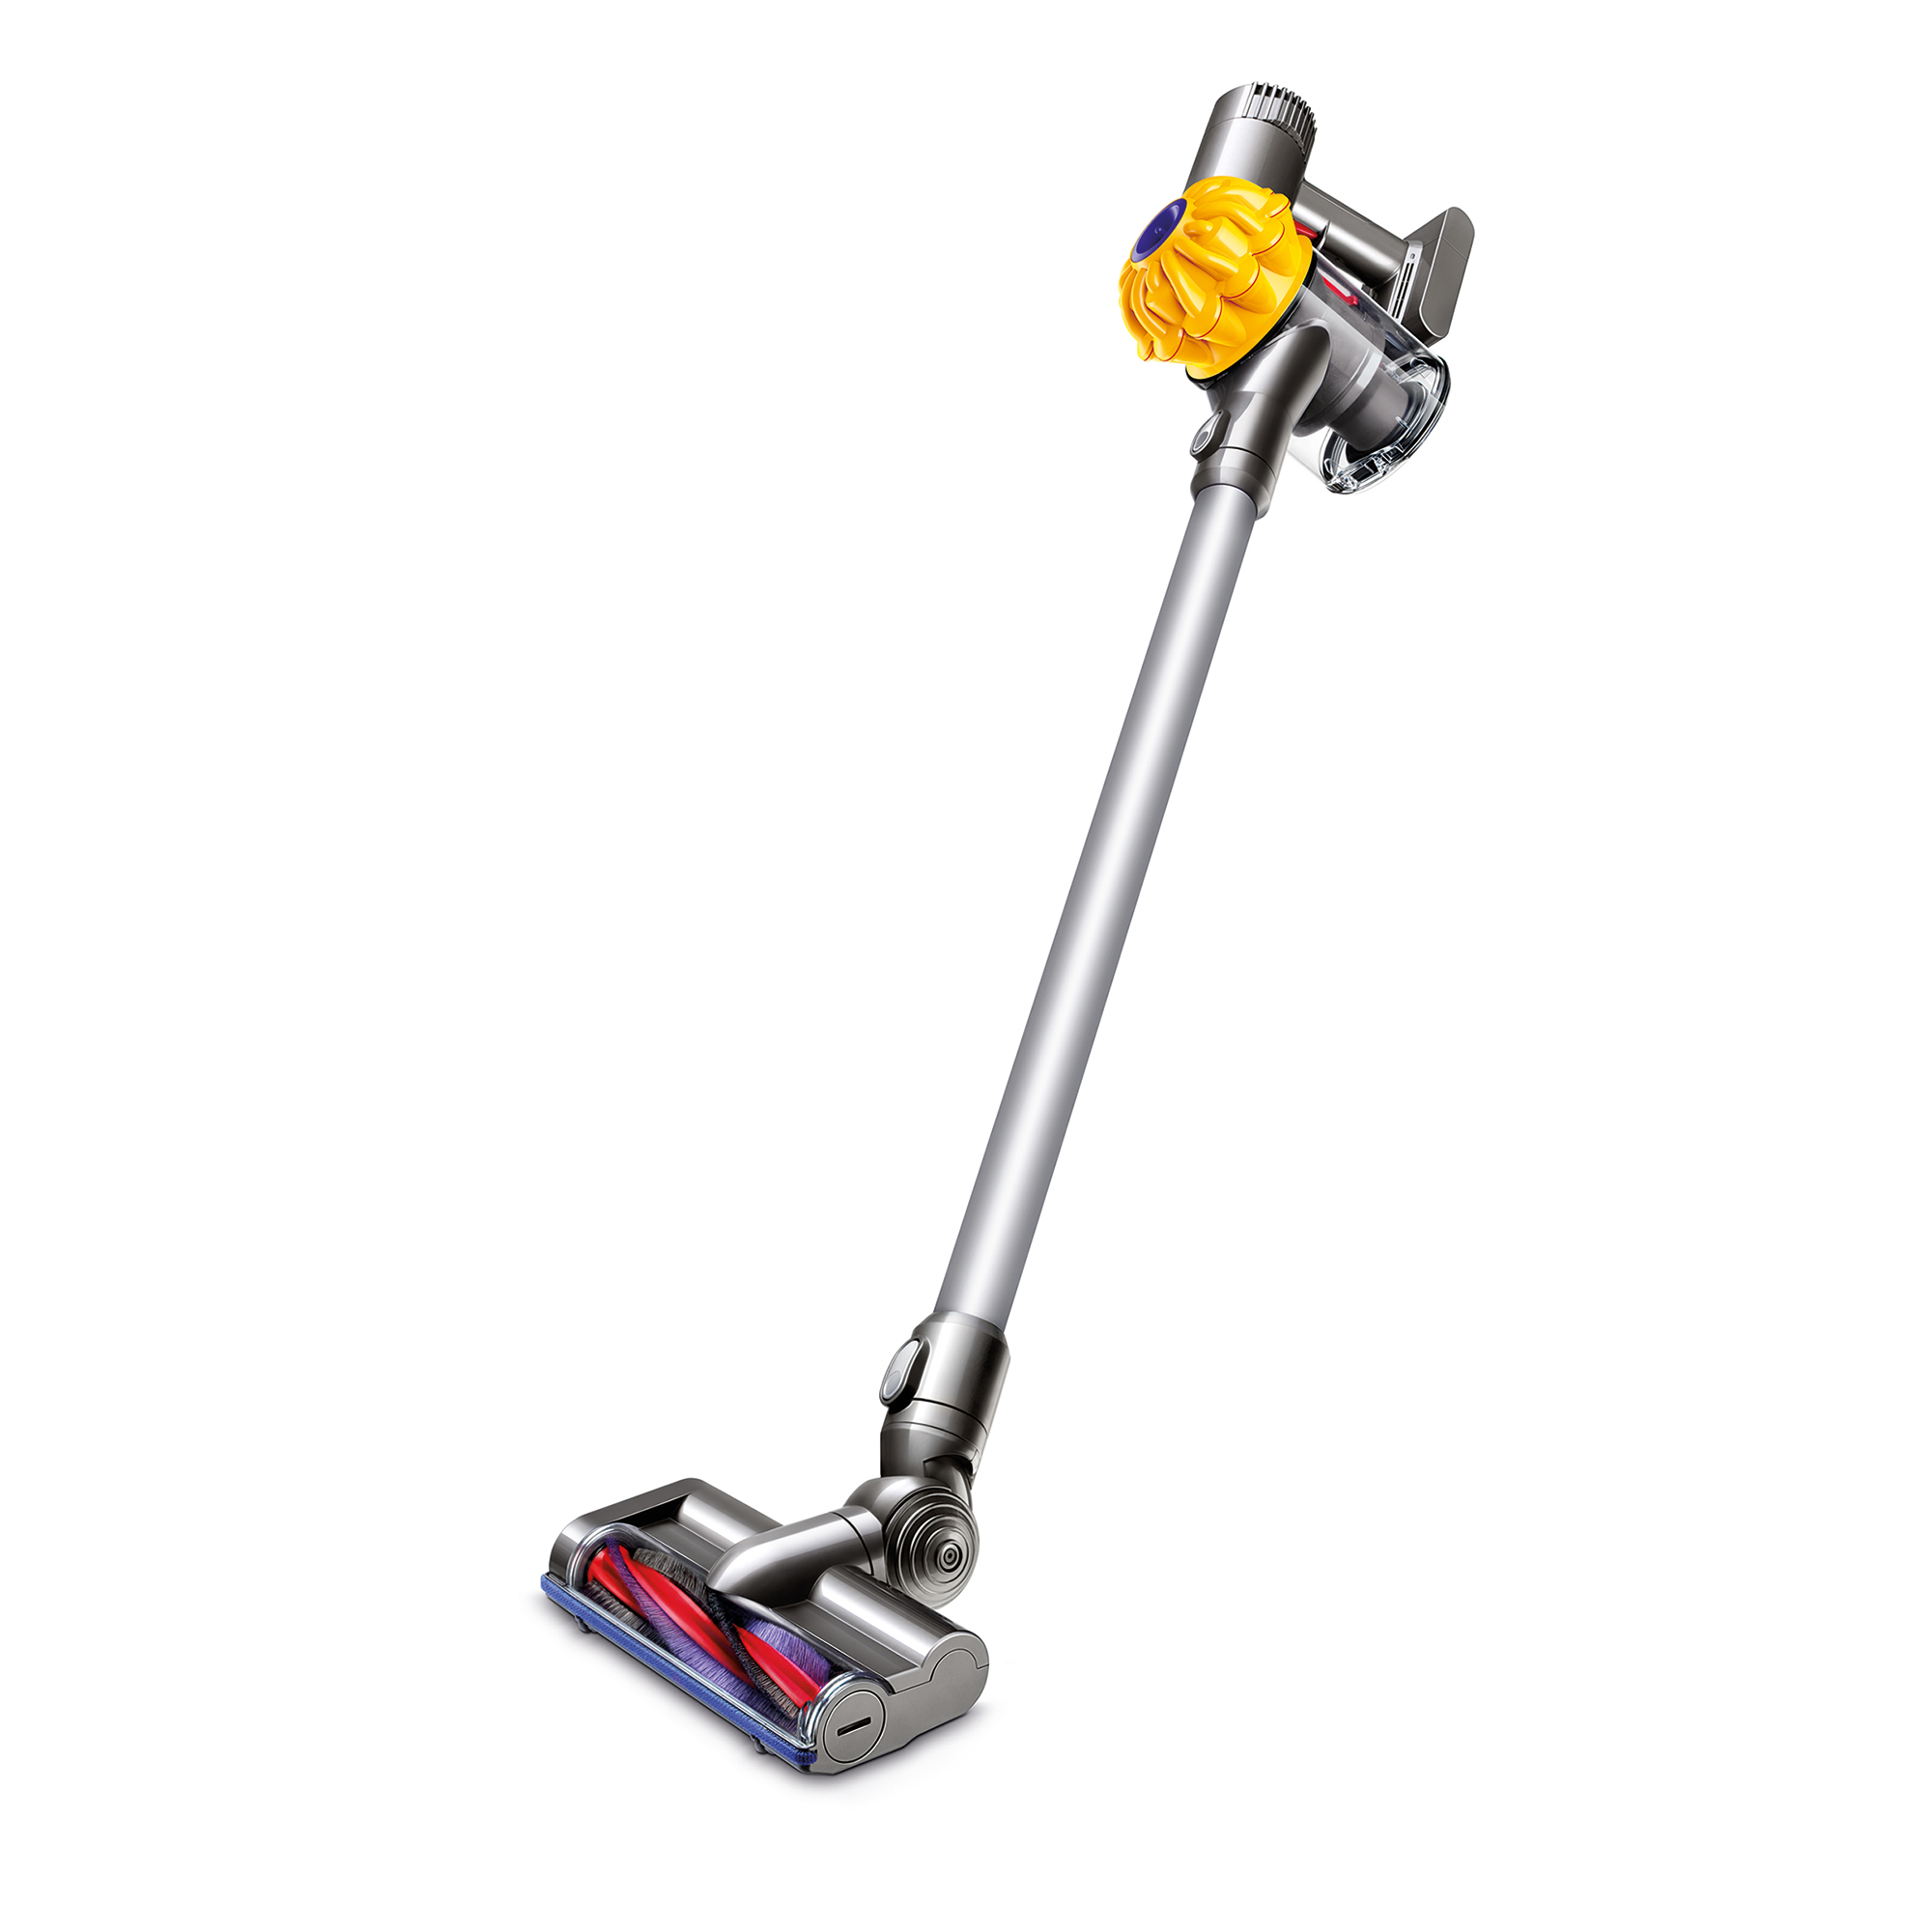 Dyson DC59 Animal Cordless Vacuum Cleaner - image 1 of 4